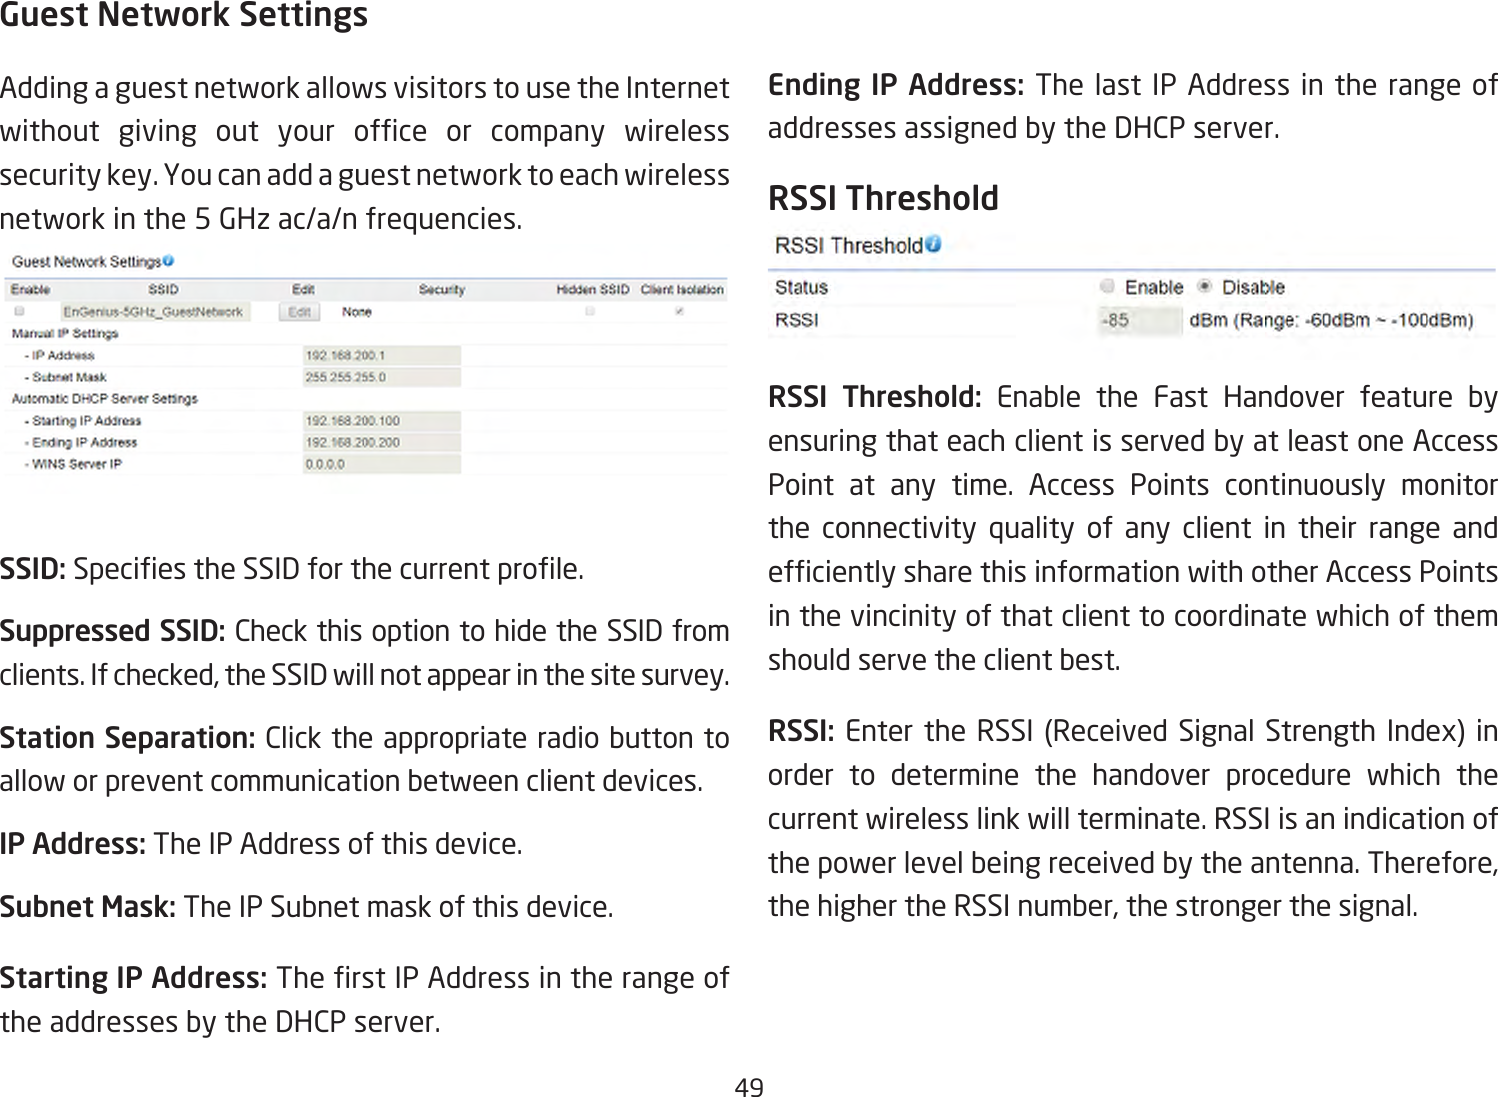 49Guest Network SettingsAdding a guest network allows visitors to use the Internet without giving out your ofce or company wirelesssecuritykey.Youcanaddaguestnetworktoeachwirelessnetwork in the 5 GHz ac/a/n frequencies.SSID:SpeciestheSSIDforthecurrentprole.Suppressed SSID: Check this option to hide the SSID from clients. If checked, the SSID will not appear in the site survey.Station Separation: Click the appropriate radio button to allow or prevent communication between client devices.IP Address: The IP Address of this device.Subnet Mask: The IP Subnet mask of this device.Starting IP Address: TherstIPAddressintherangeofthe addresses by the DHCP server. Ending IP Address: The last IP Address in the range of addresses assigned by the DHCP server.RSSI ThresholdRSSI Threshold: Enable the Fast Handover feature by ensuring that each client is served by at least one Access Point at any time. Access Points continuously monitor the connectivity quality of any client in their range and efcientlysharethisinformationwithotherAccessPointsin the vincinity of that client to coordinate which of them should serve the client best. RSSI: Enter the RSSI (Received Signal Strength Index) inorder to determine the handover procedure which the current wireless link will terminate. RSSI is an indication of the power level being received by the antenna. Therefore, the higher the RSSI number, the stronger the signal.